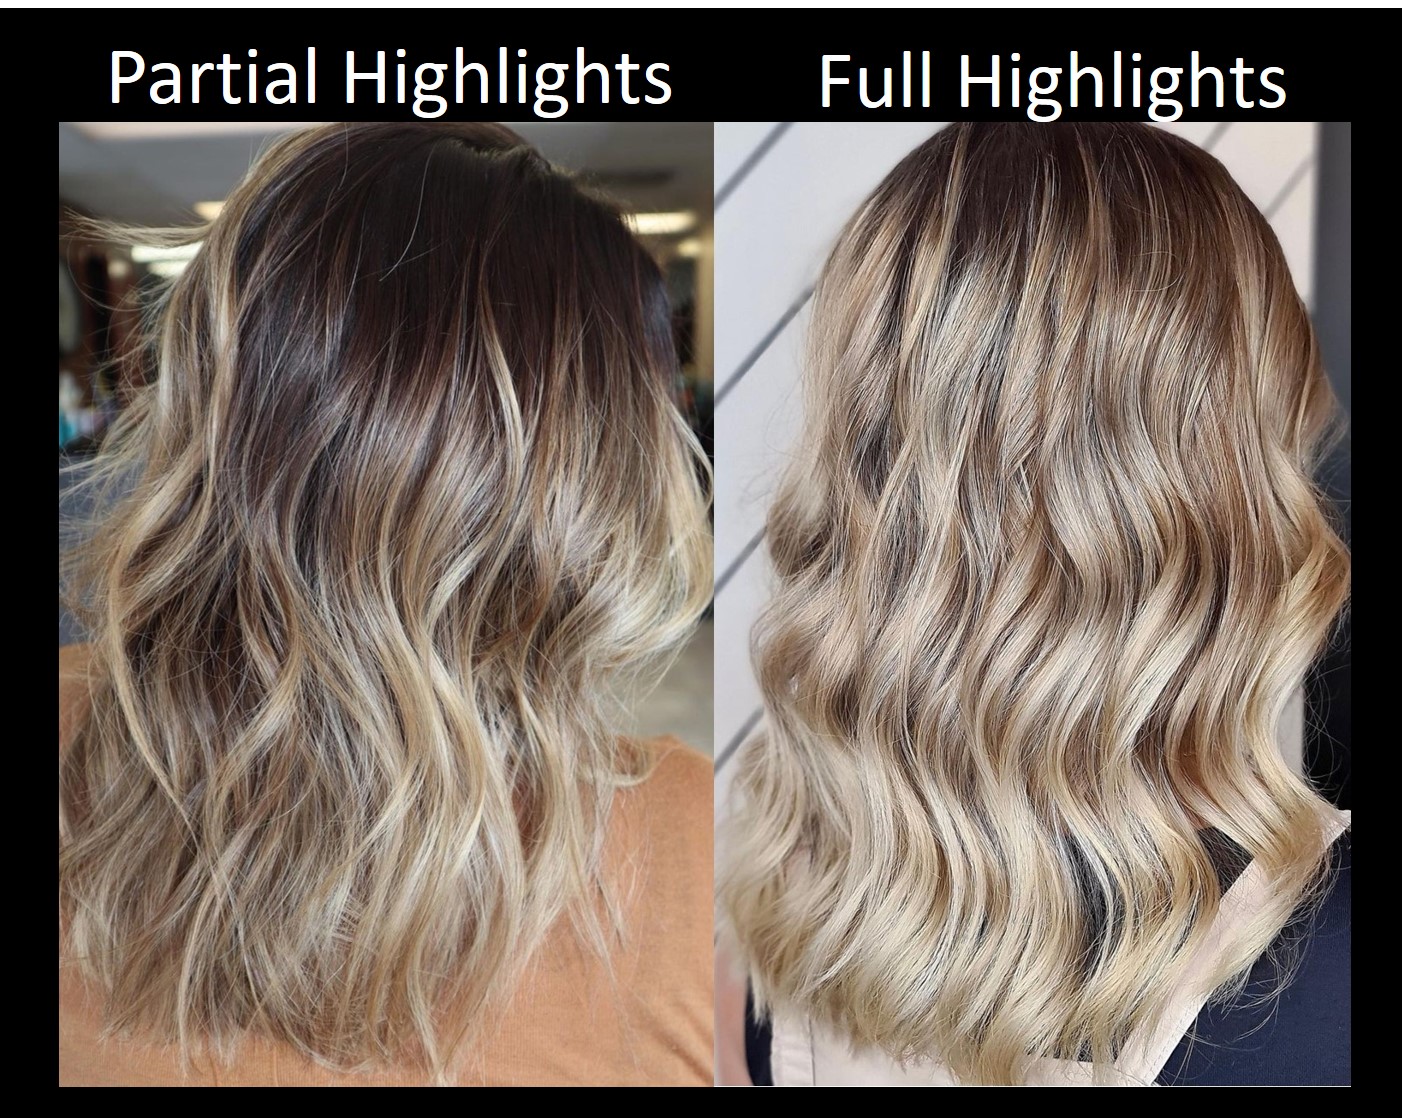 Do You Really Need Full Highlights Partial Will Be Good too? | Hera Beauty